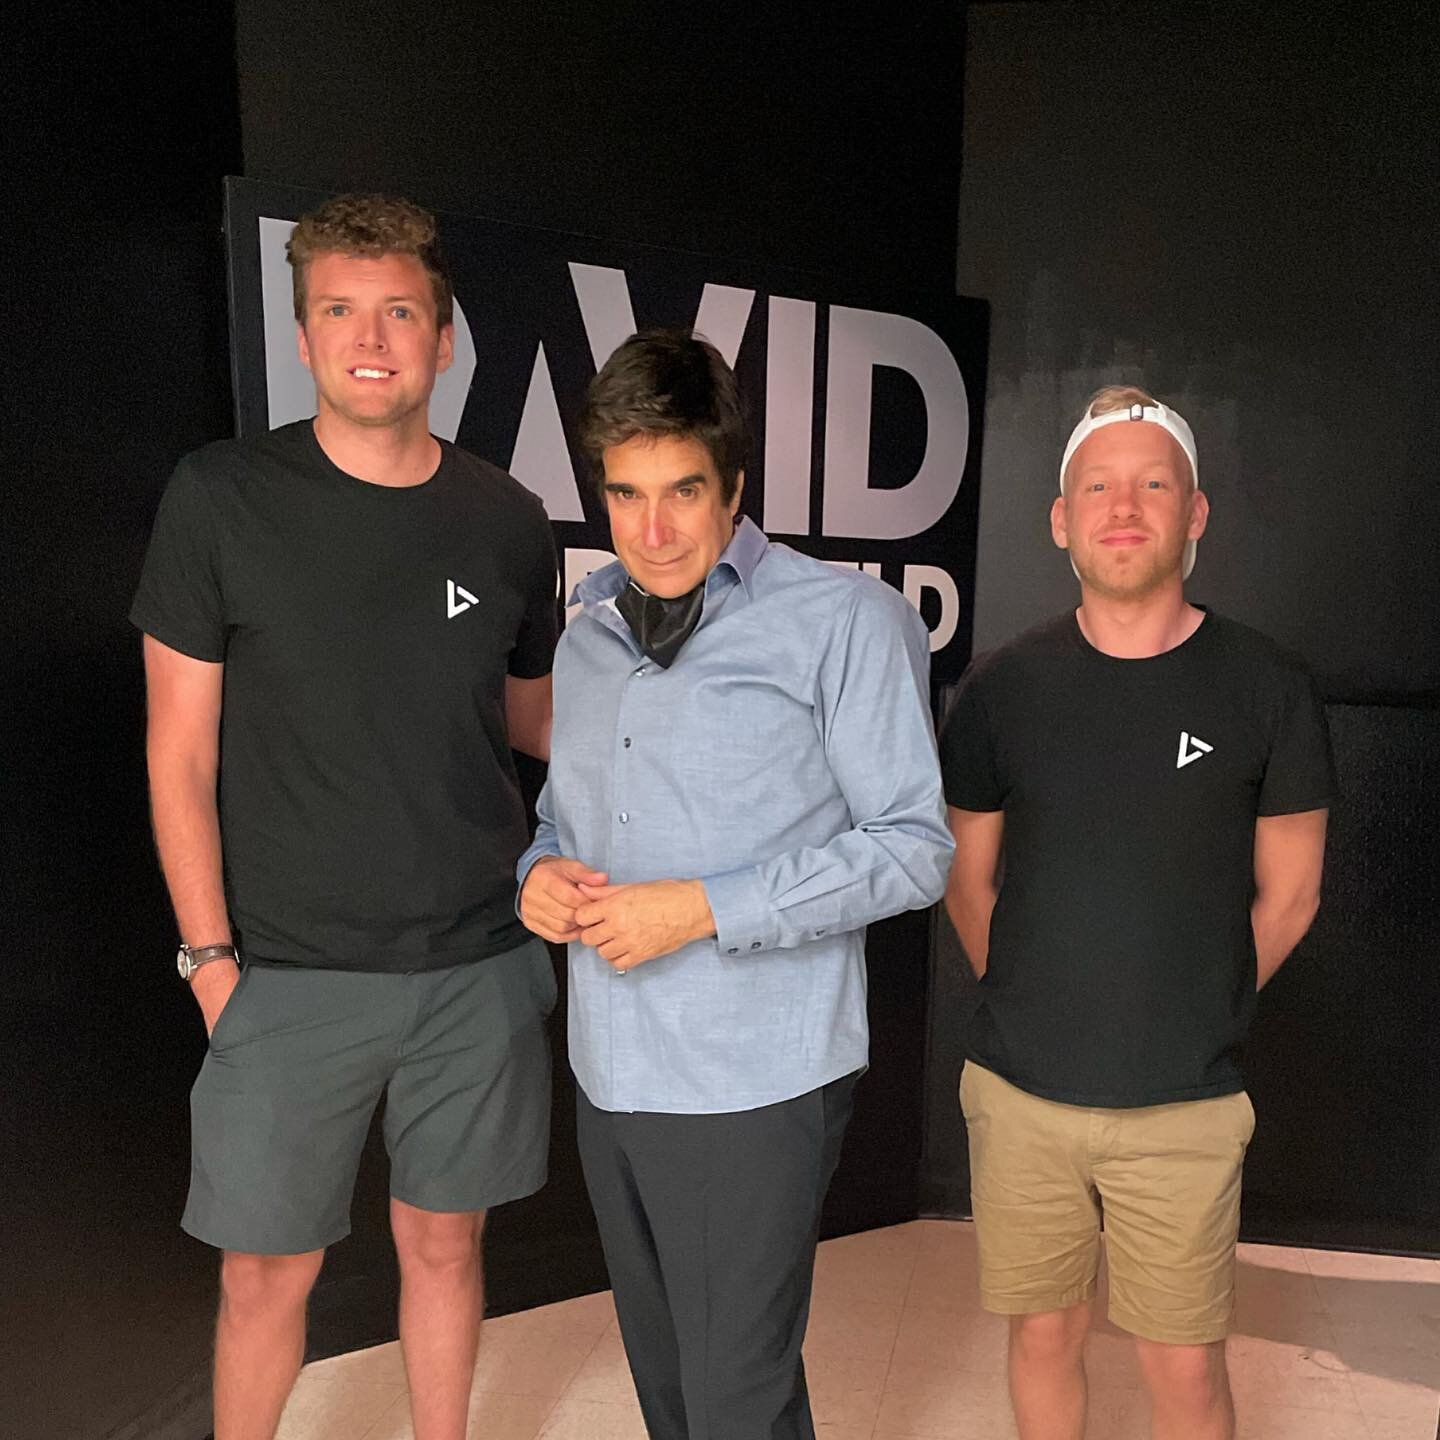 David Copperfield has always been an inspiration to us here at Leary Studios. David has earned 21 Emmy Awards through incorporating world-class cinematography in his illusions. We were fortunate enough to discuss how magic and video production are bo